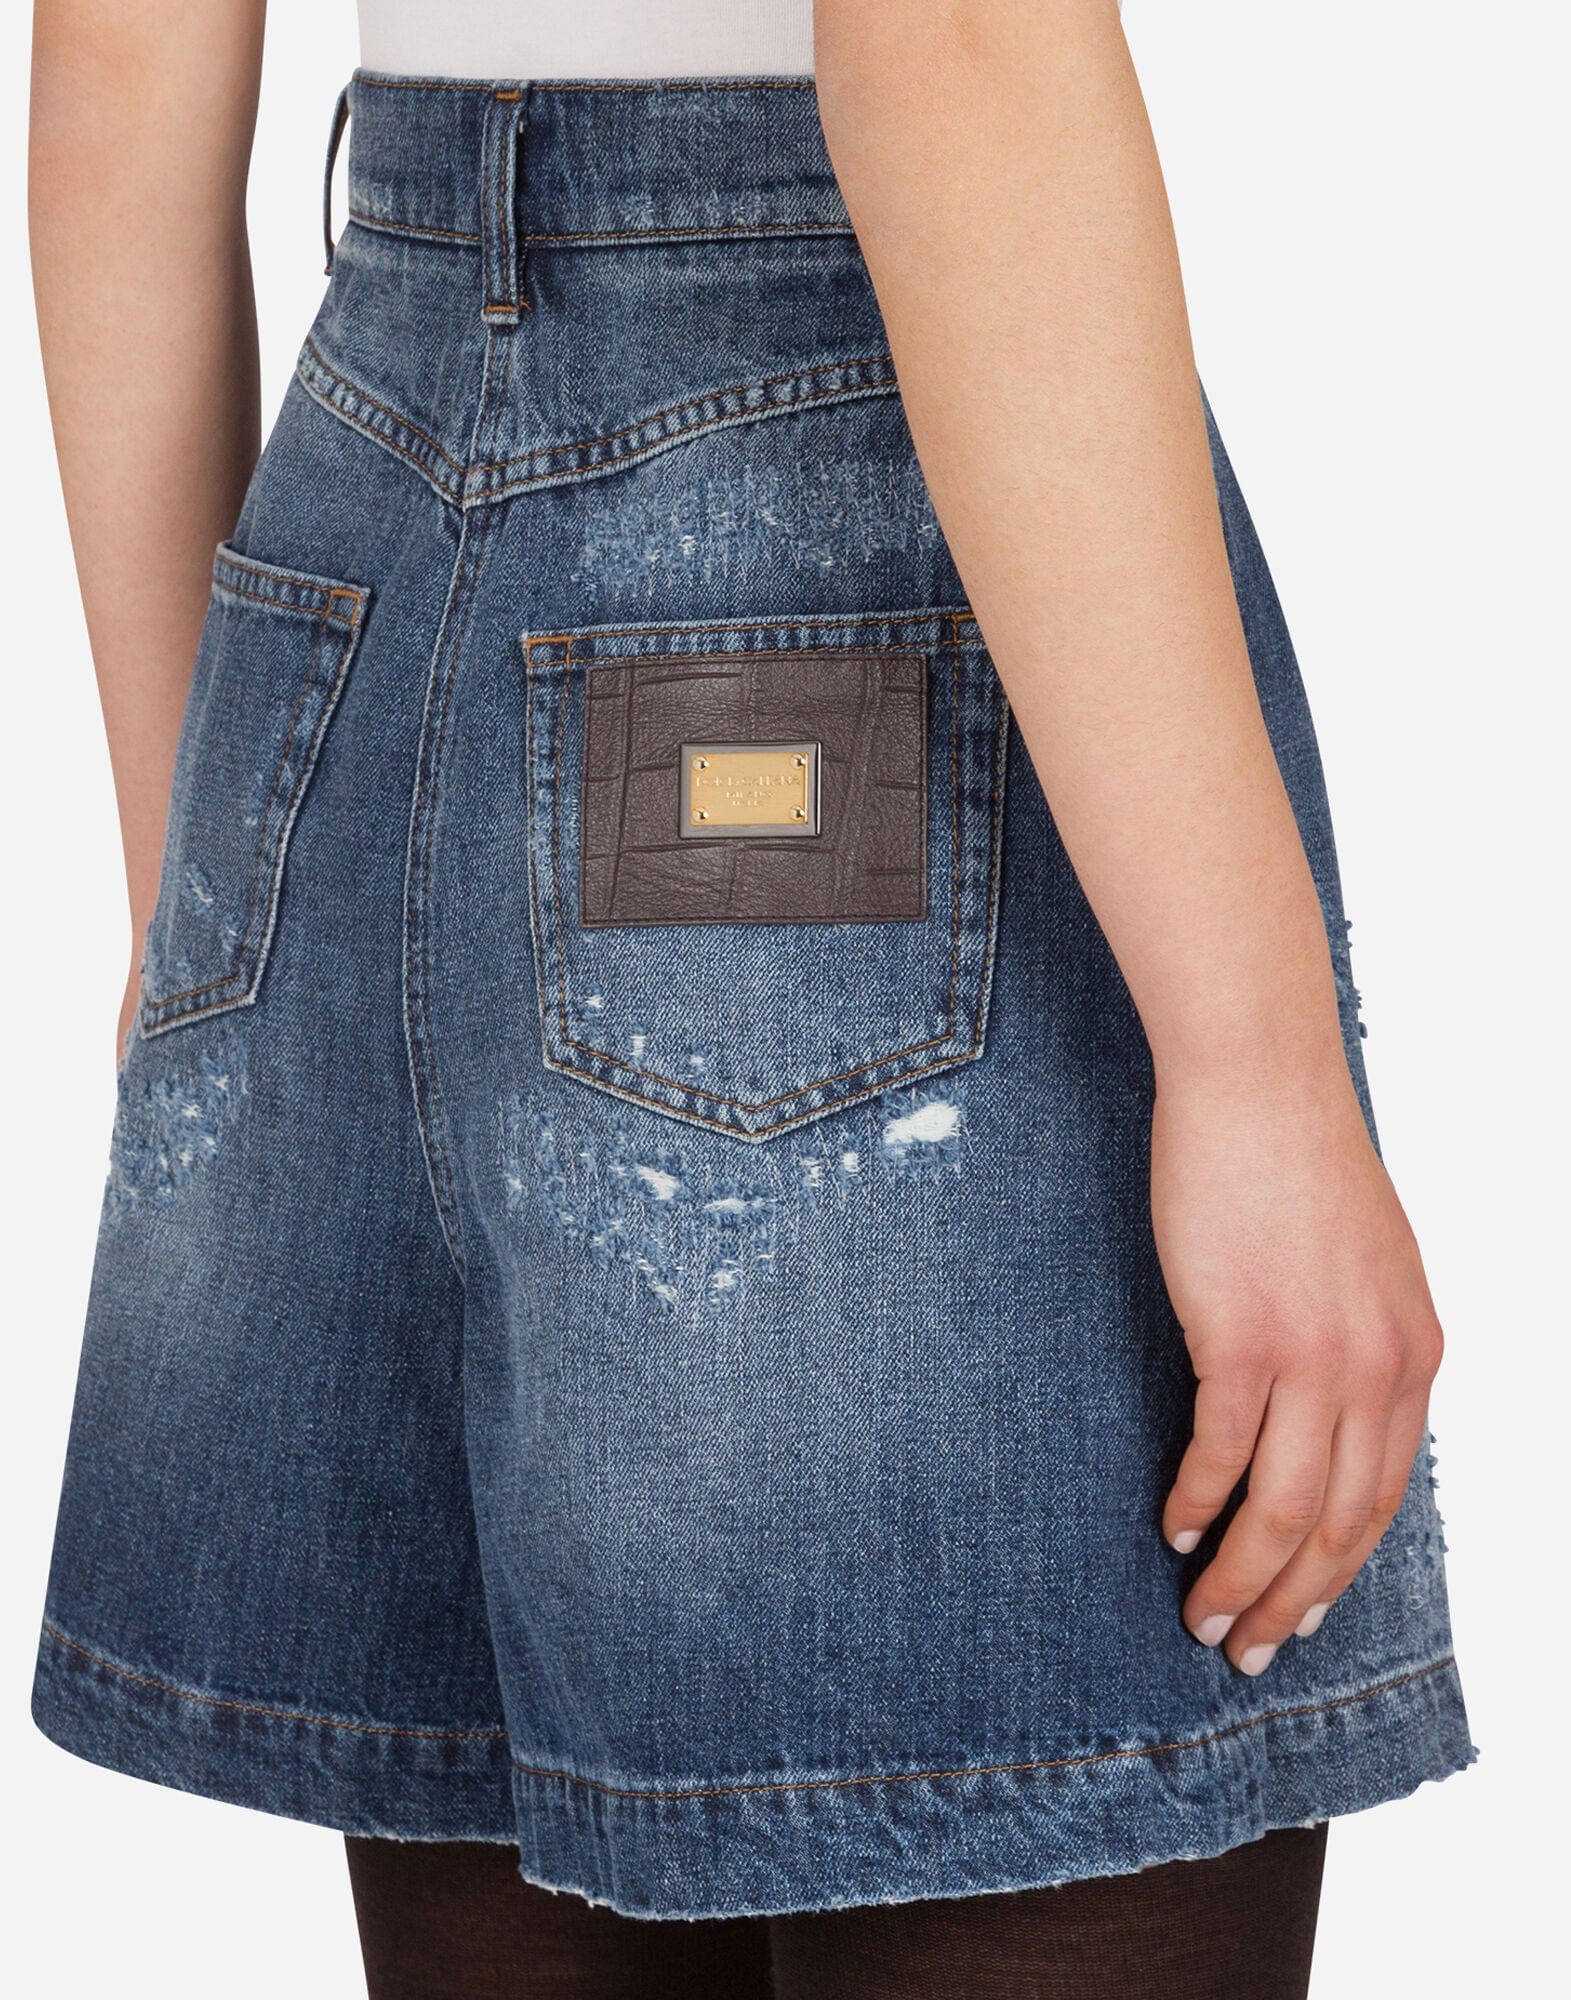 Denim Shorts With Rips